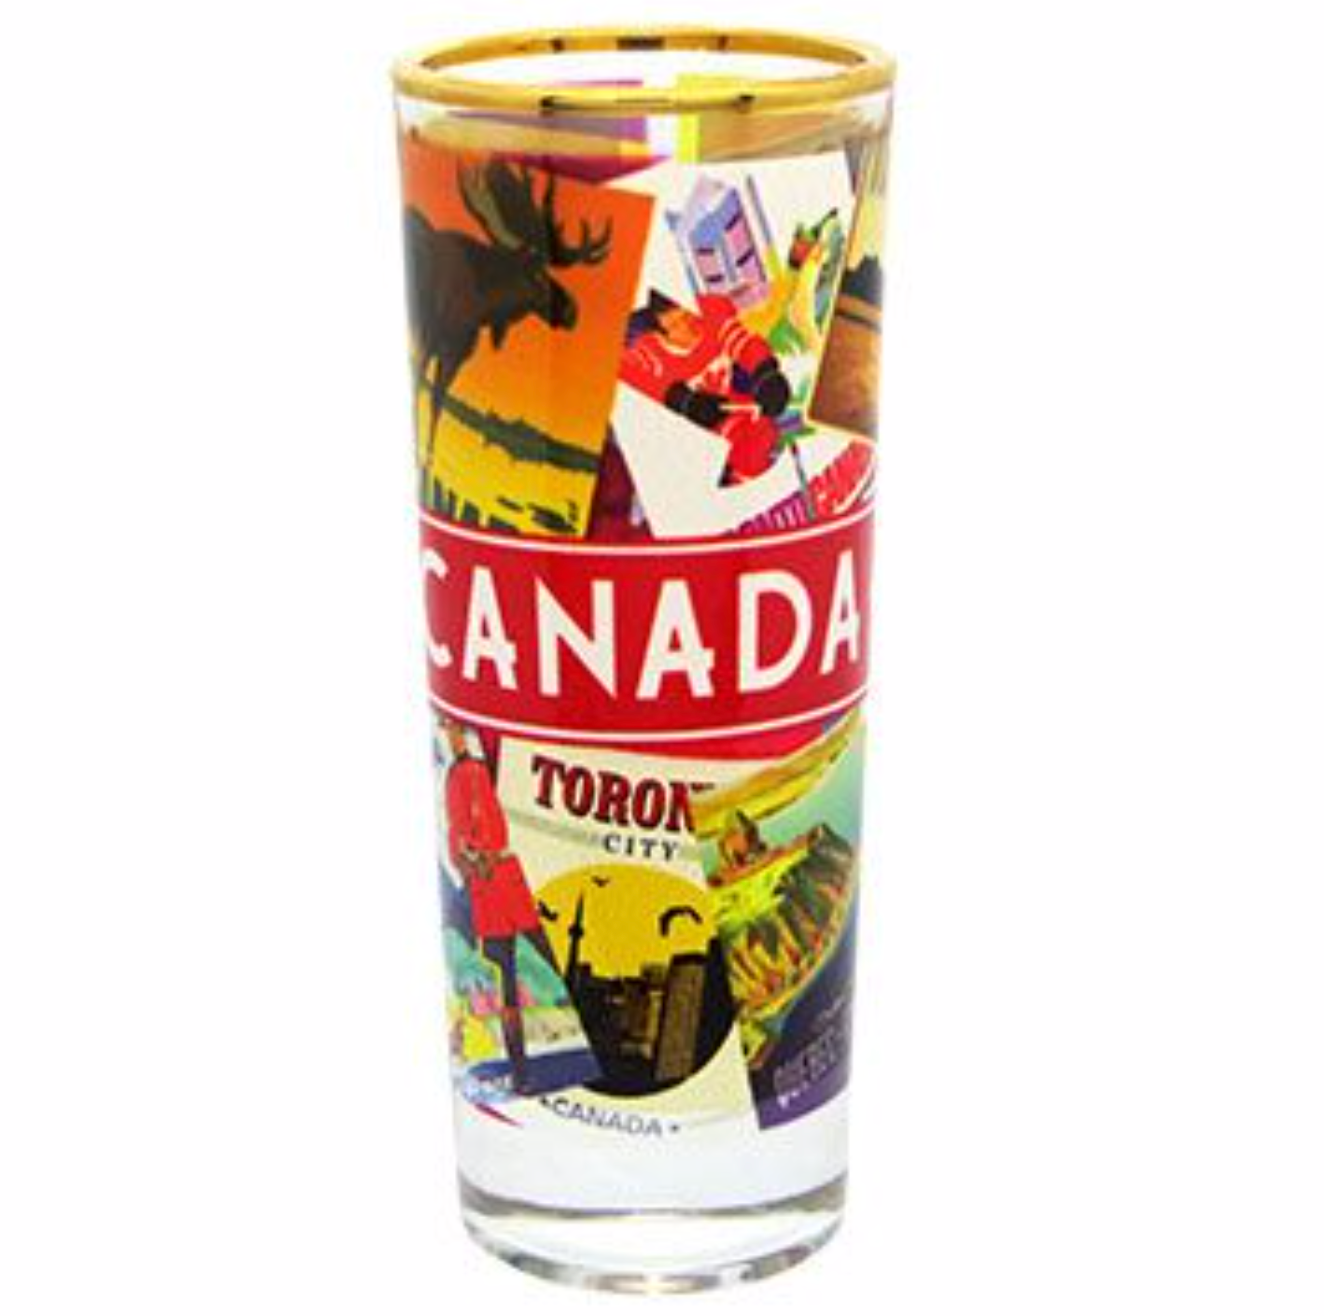 Shooter Dye Sublimation with Gold Rim, Retro Collage Design, Canada General